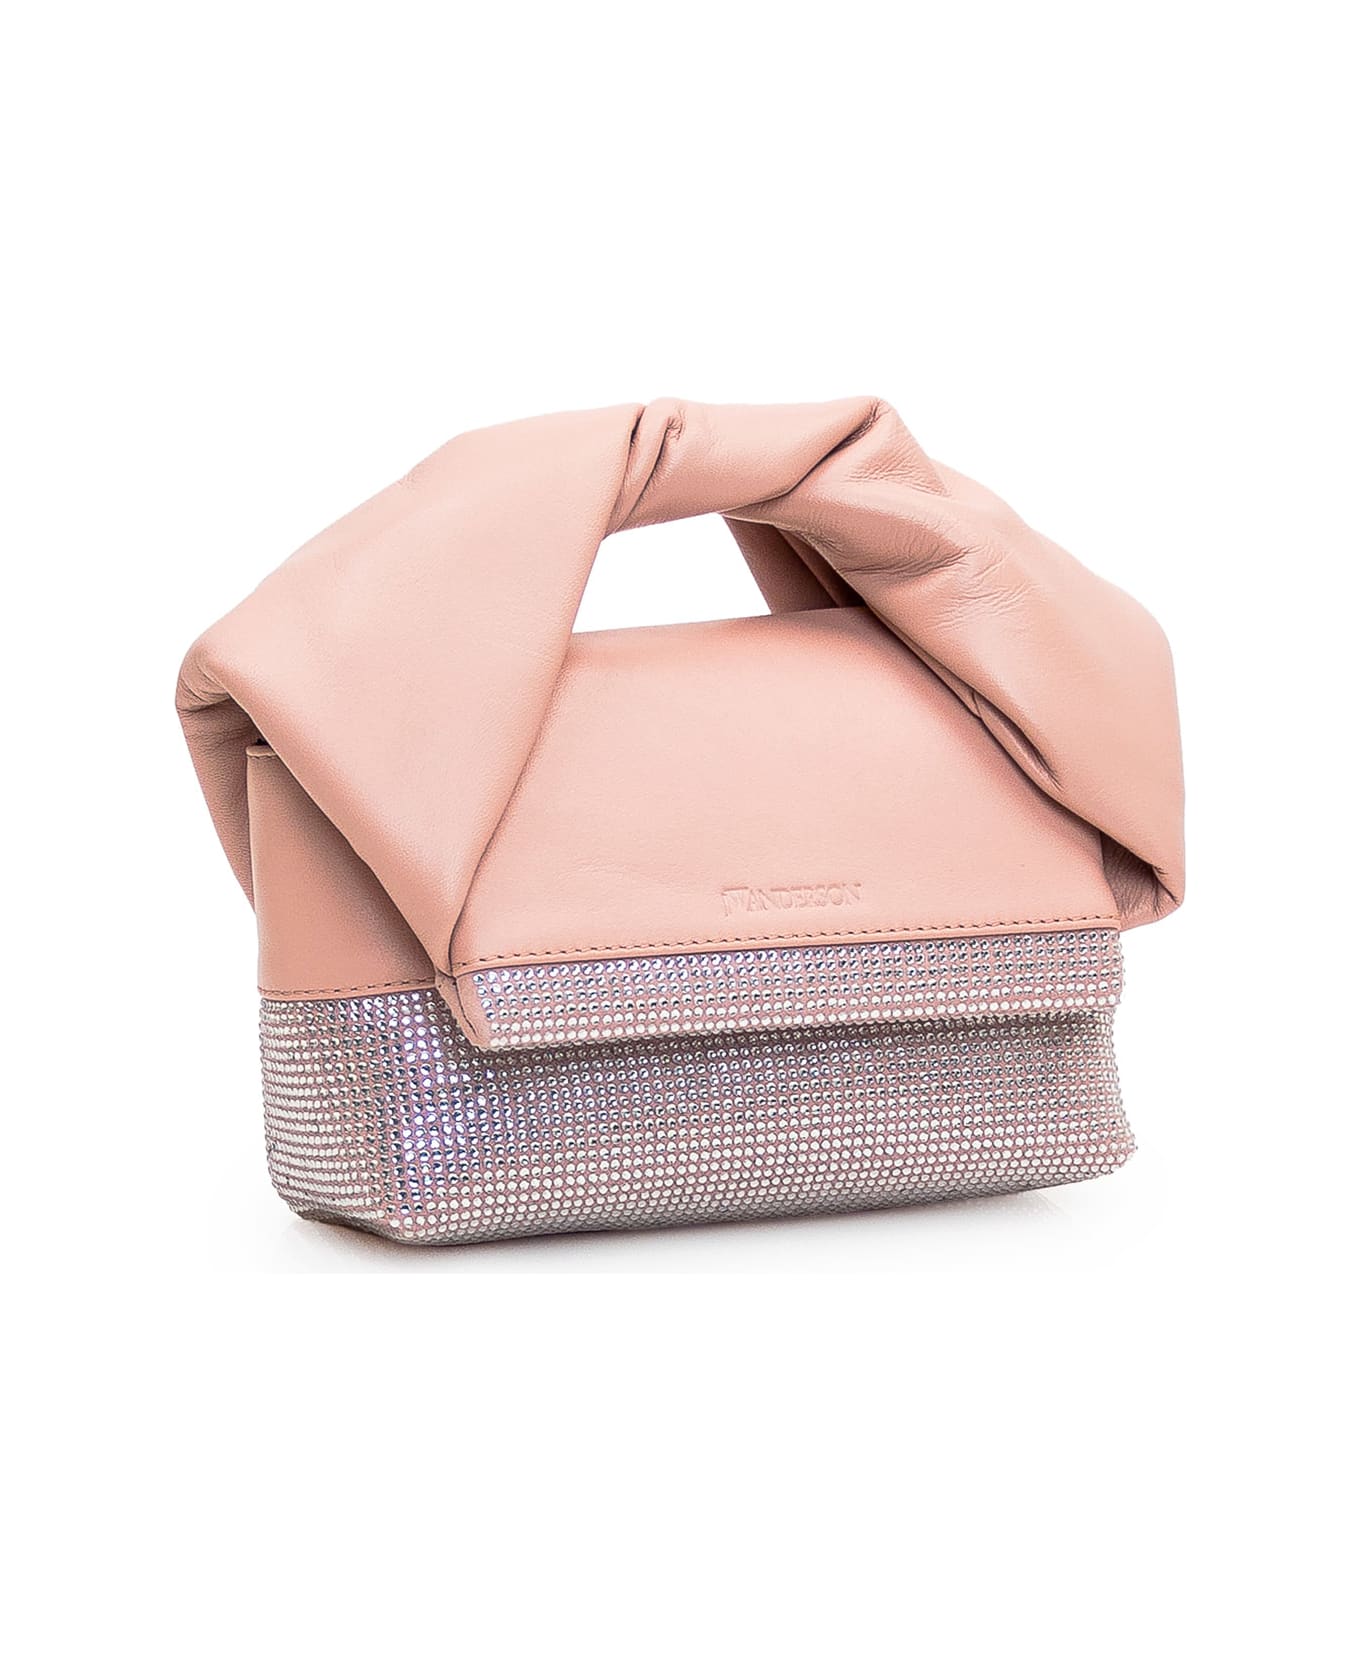 J.W. Anderson Small Twister Bag - DUSTY ROSE